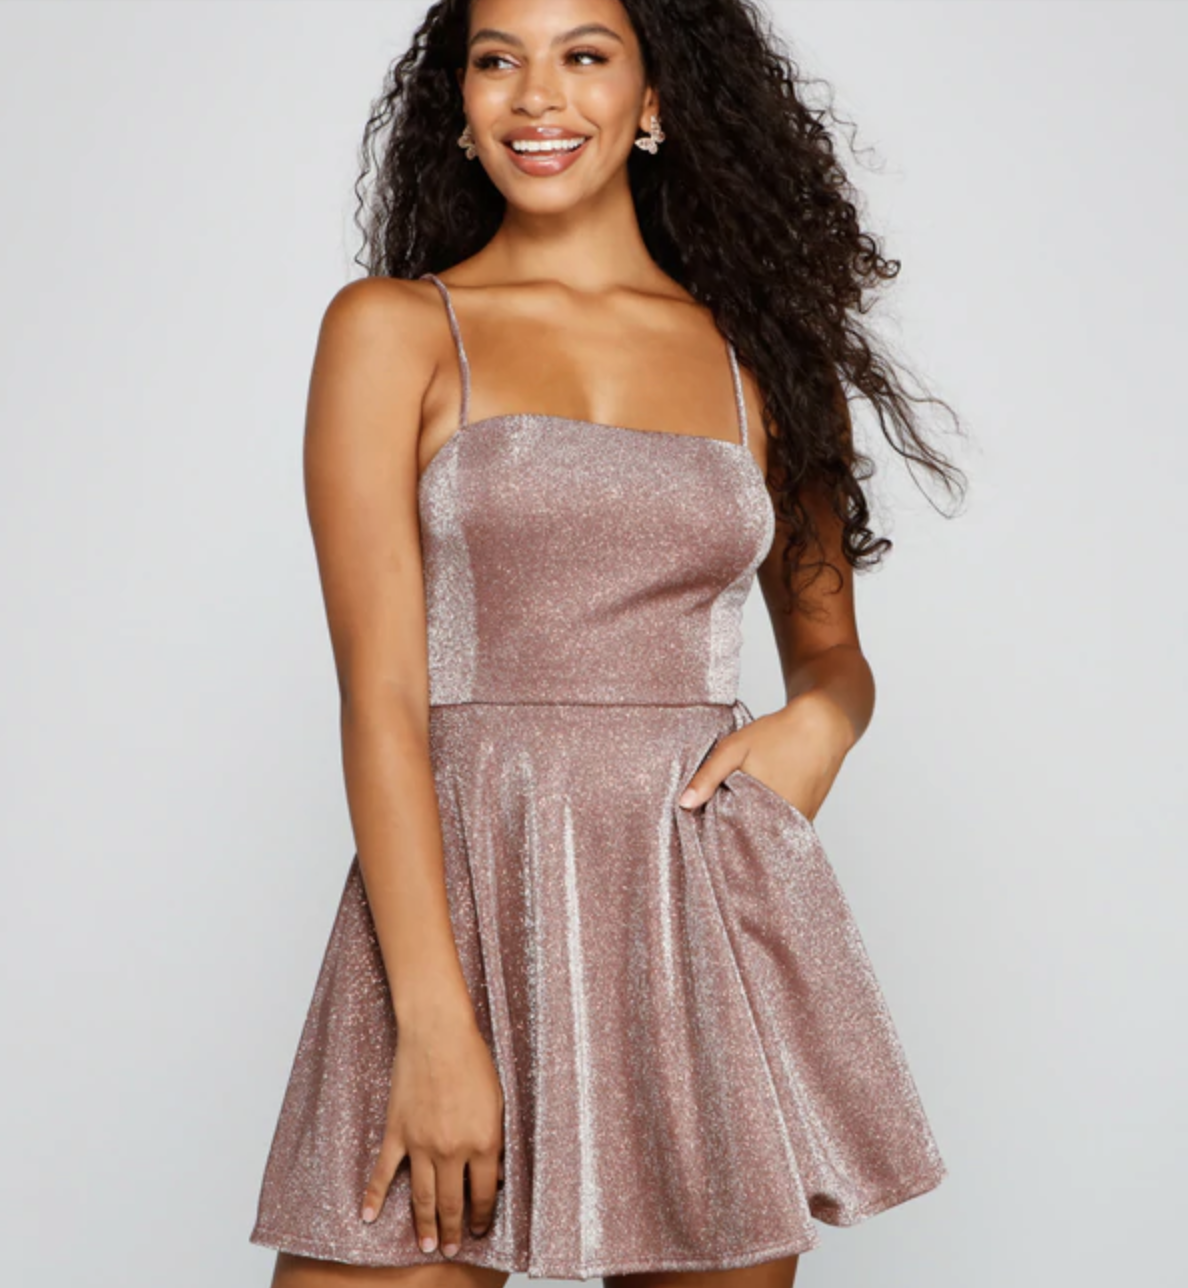 13 Prom Dress Styles That’ll Make Your Look Stand Out